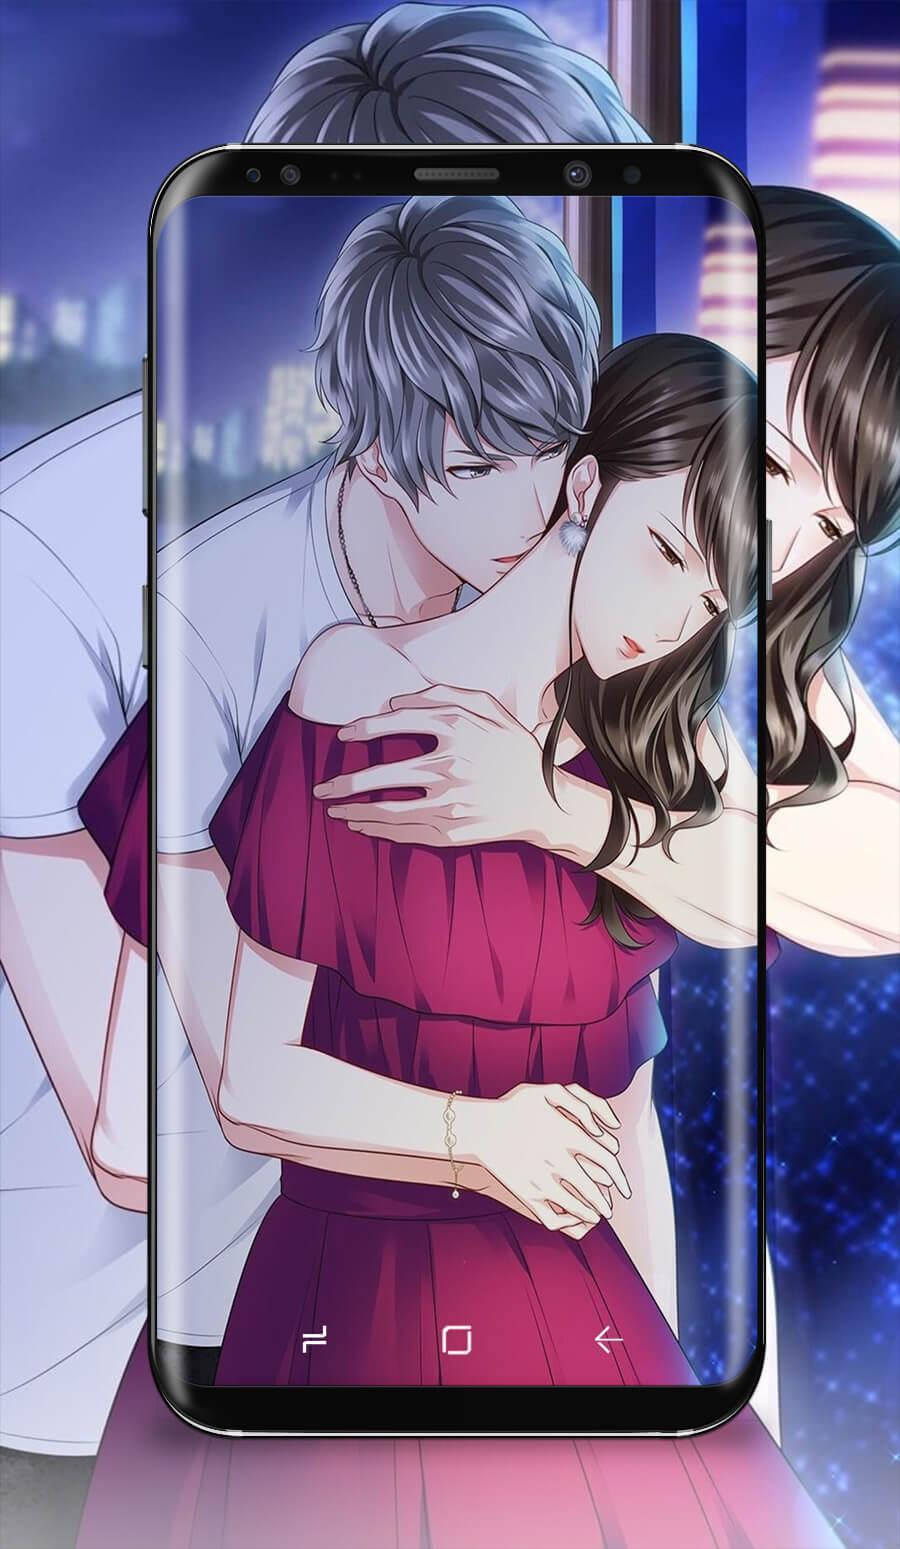 Anime Couple Kissing Wallpaper For Android Apk Download